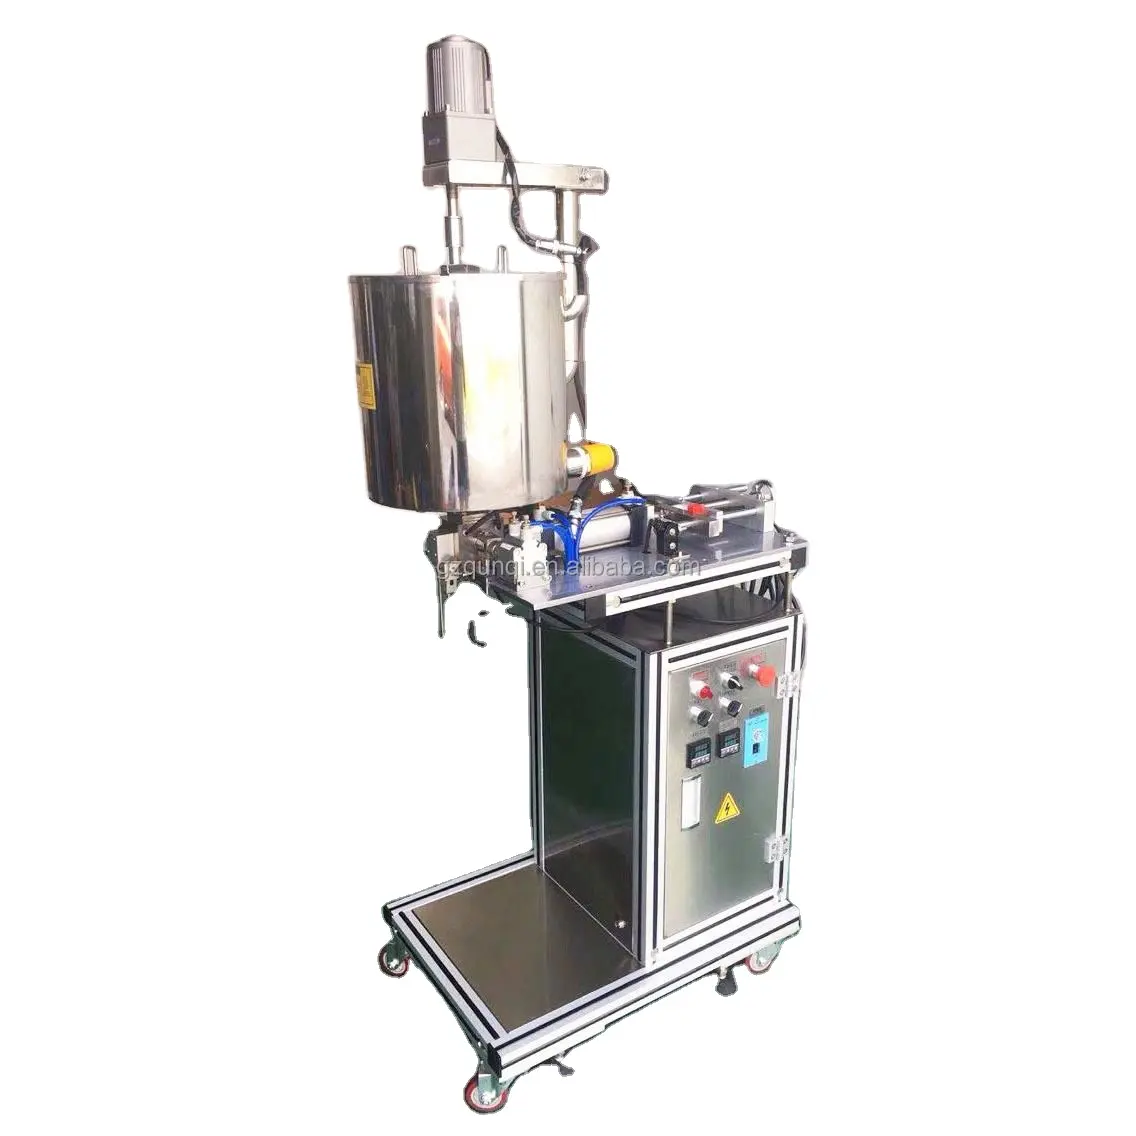 Long Projected Life Of Lipstick Filling Machine Lip Balm Lipstick Heating Filling Machine Automatic Mix And Fill Maker Stirring